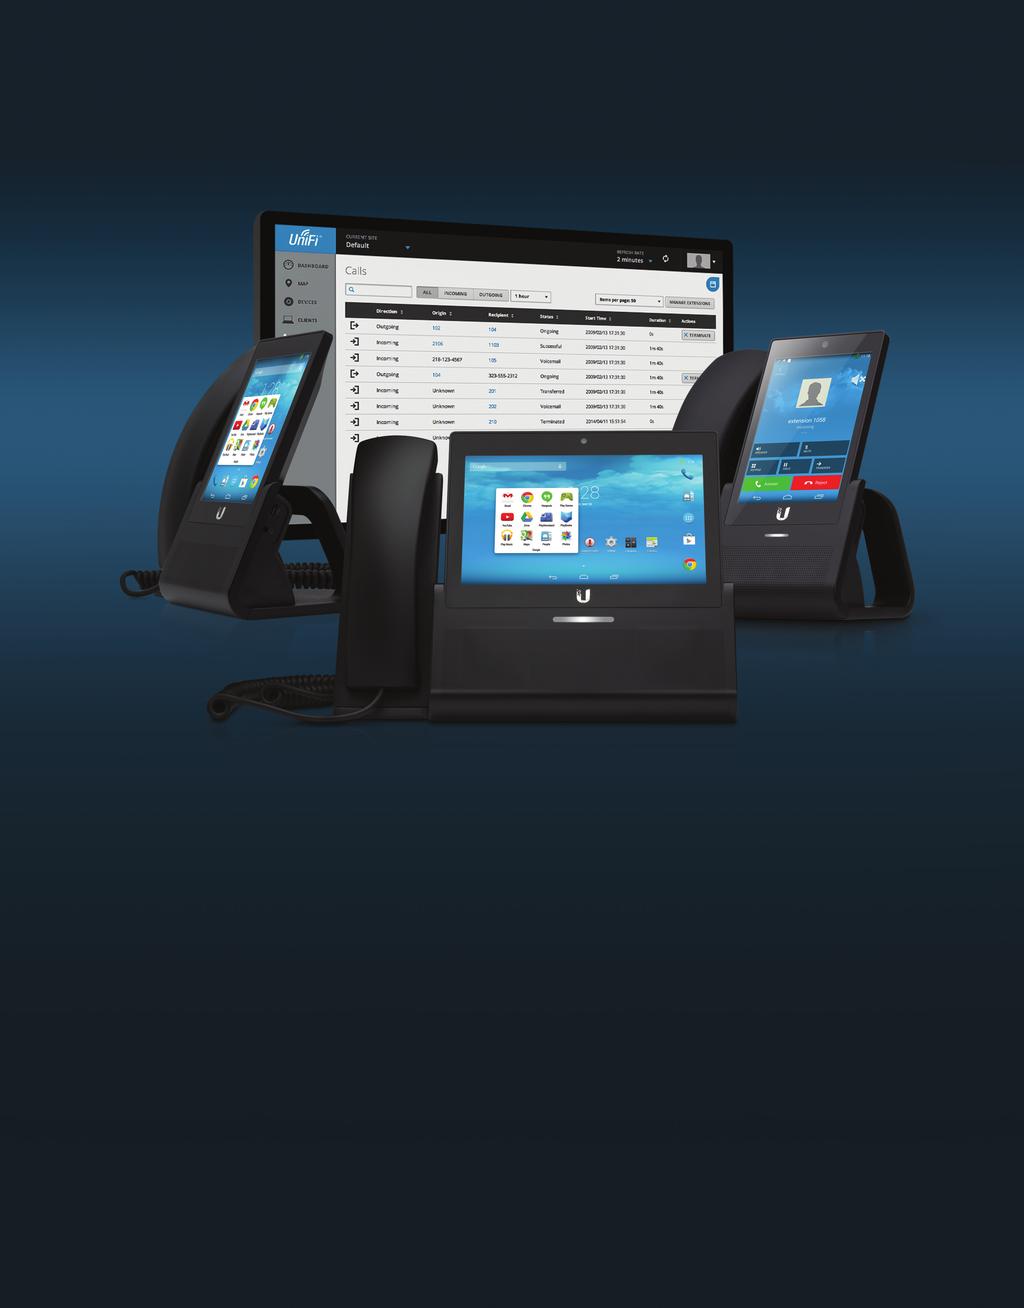 Enterprise VoIP Phone with Touchscreen Models: UVP, UVP-Pro, UVP-Executive